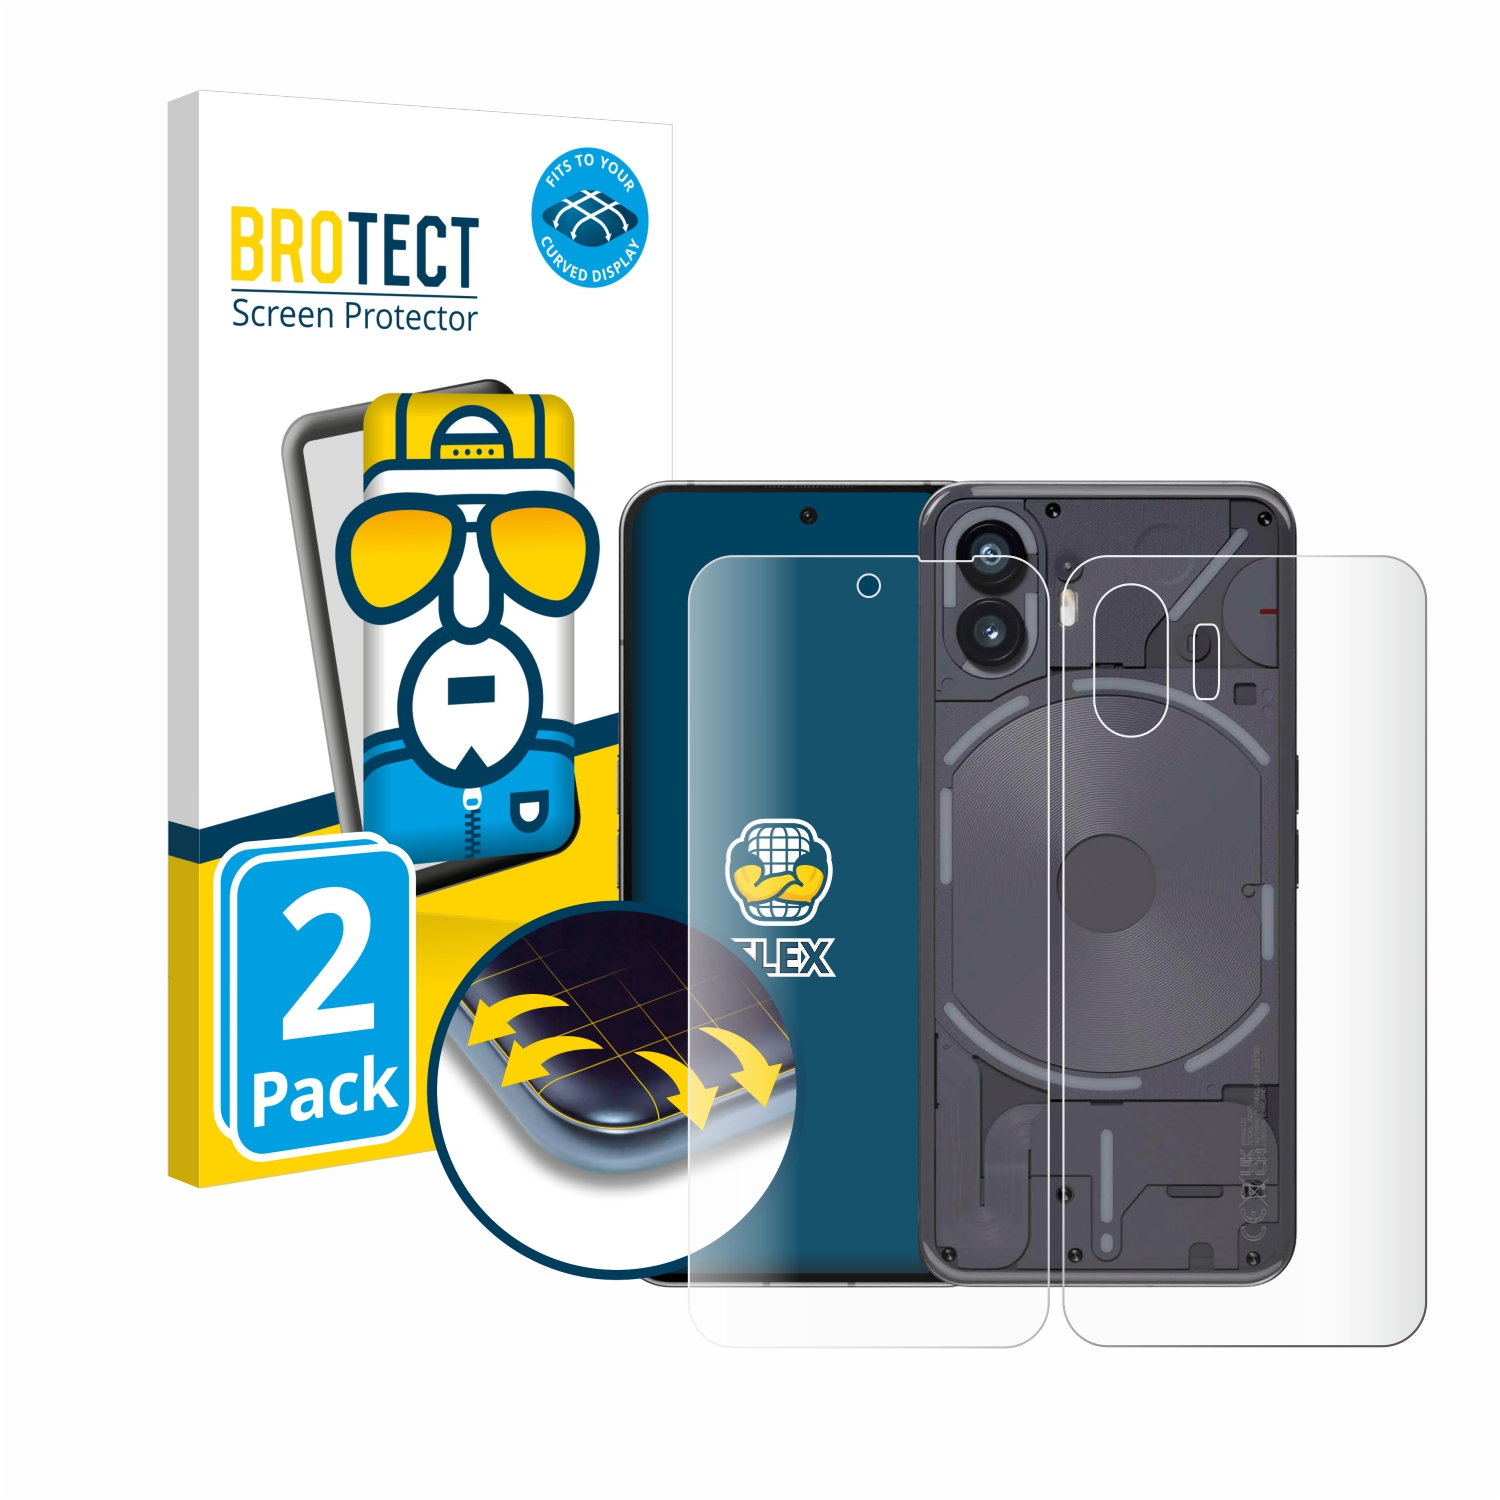 BROTECT 2x Flex Full-Cover 3D (2)) Nothing Phone Schutzfolie(für Curved